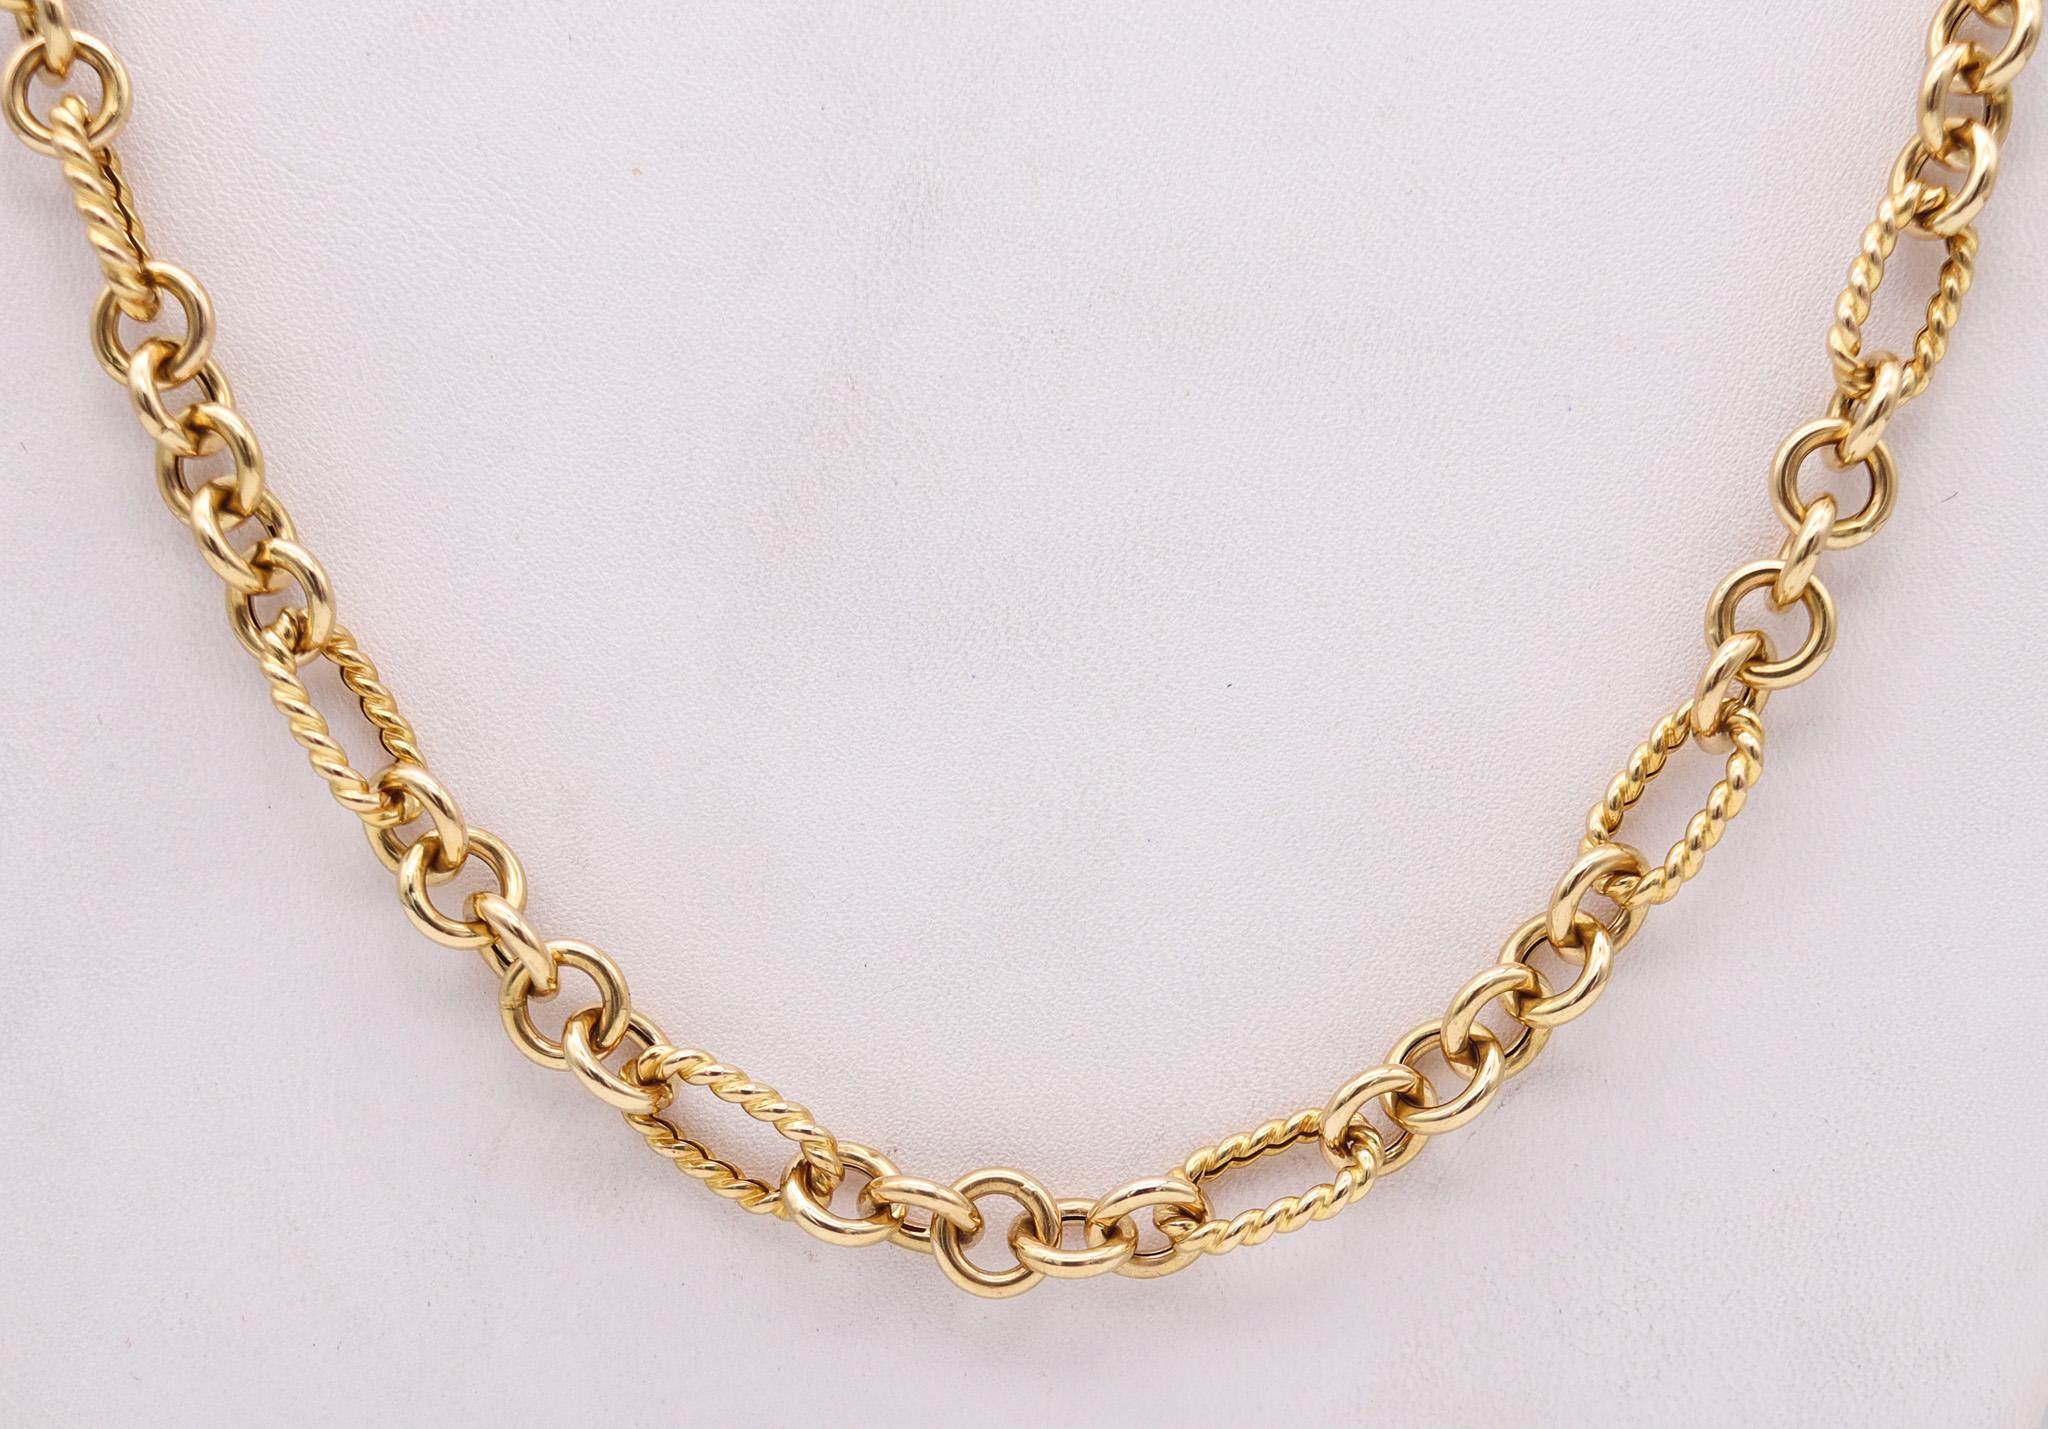 Long fancy-links chain made in Italy.

A beautiful long chain of twenty-four inches, created in Vicenza Italy. This modern chain has been crafted with twisted and circulars links made up in yellow gold of 14 karats with polished and textured